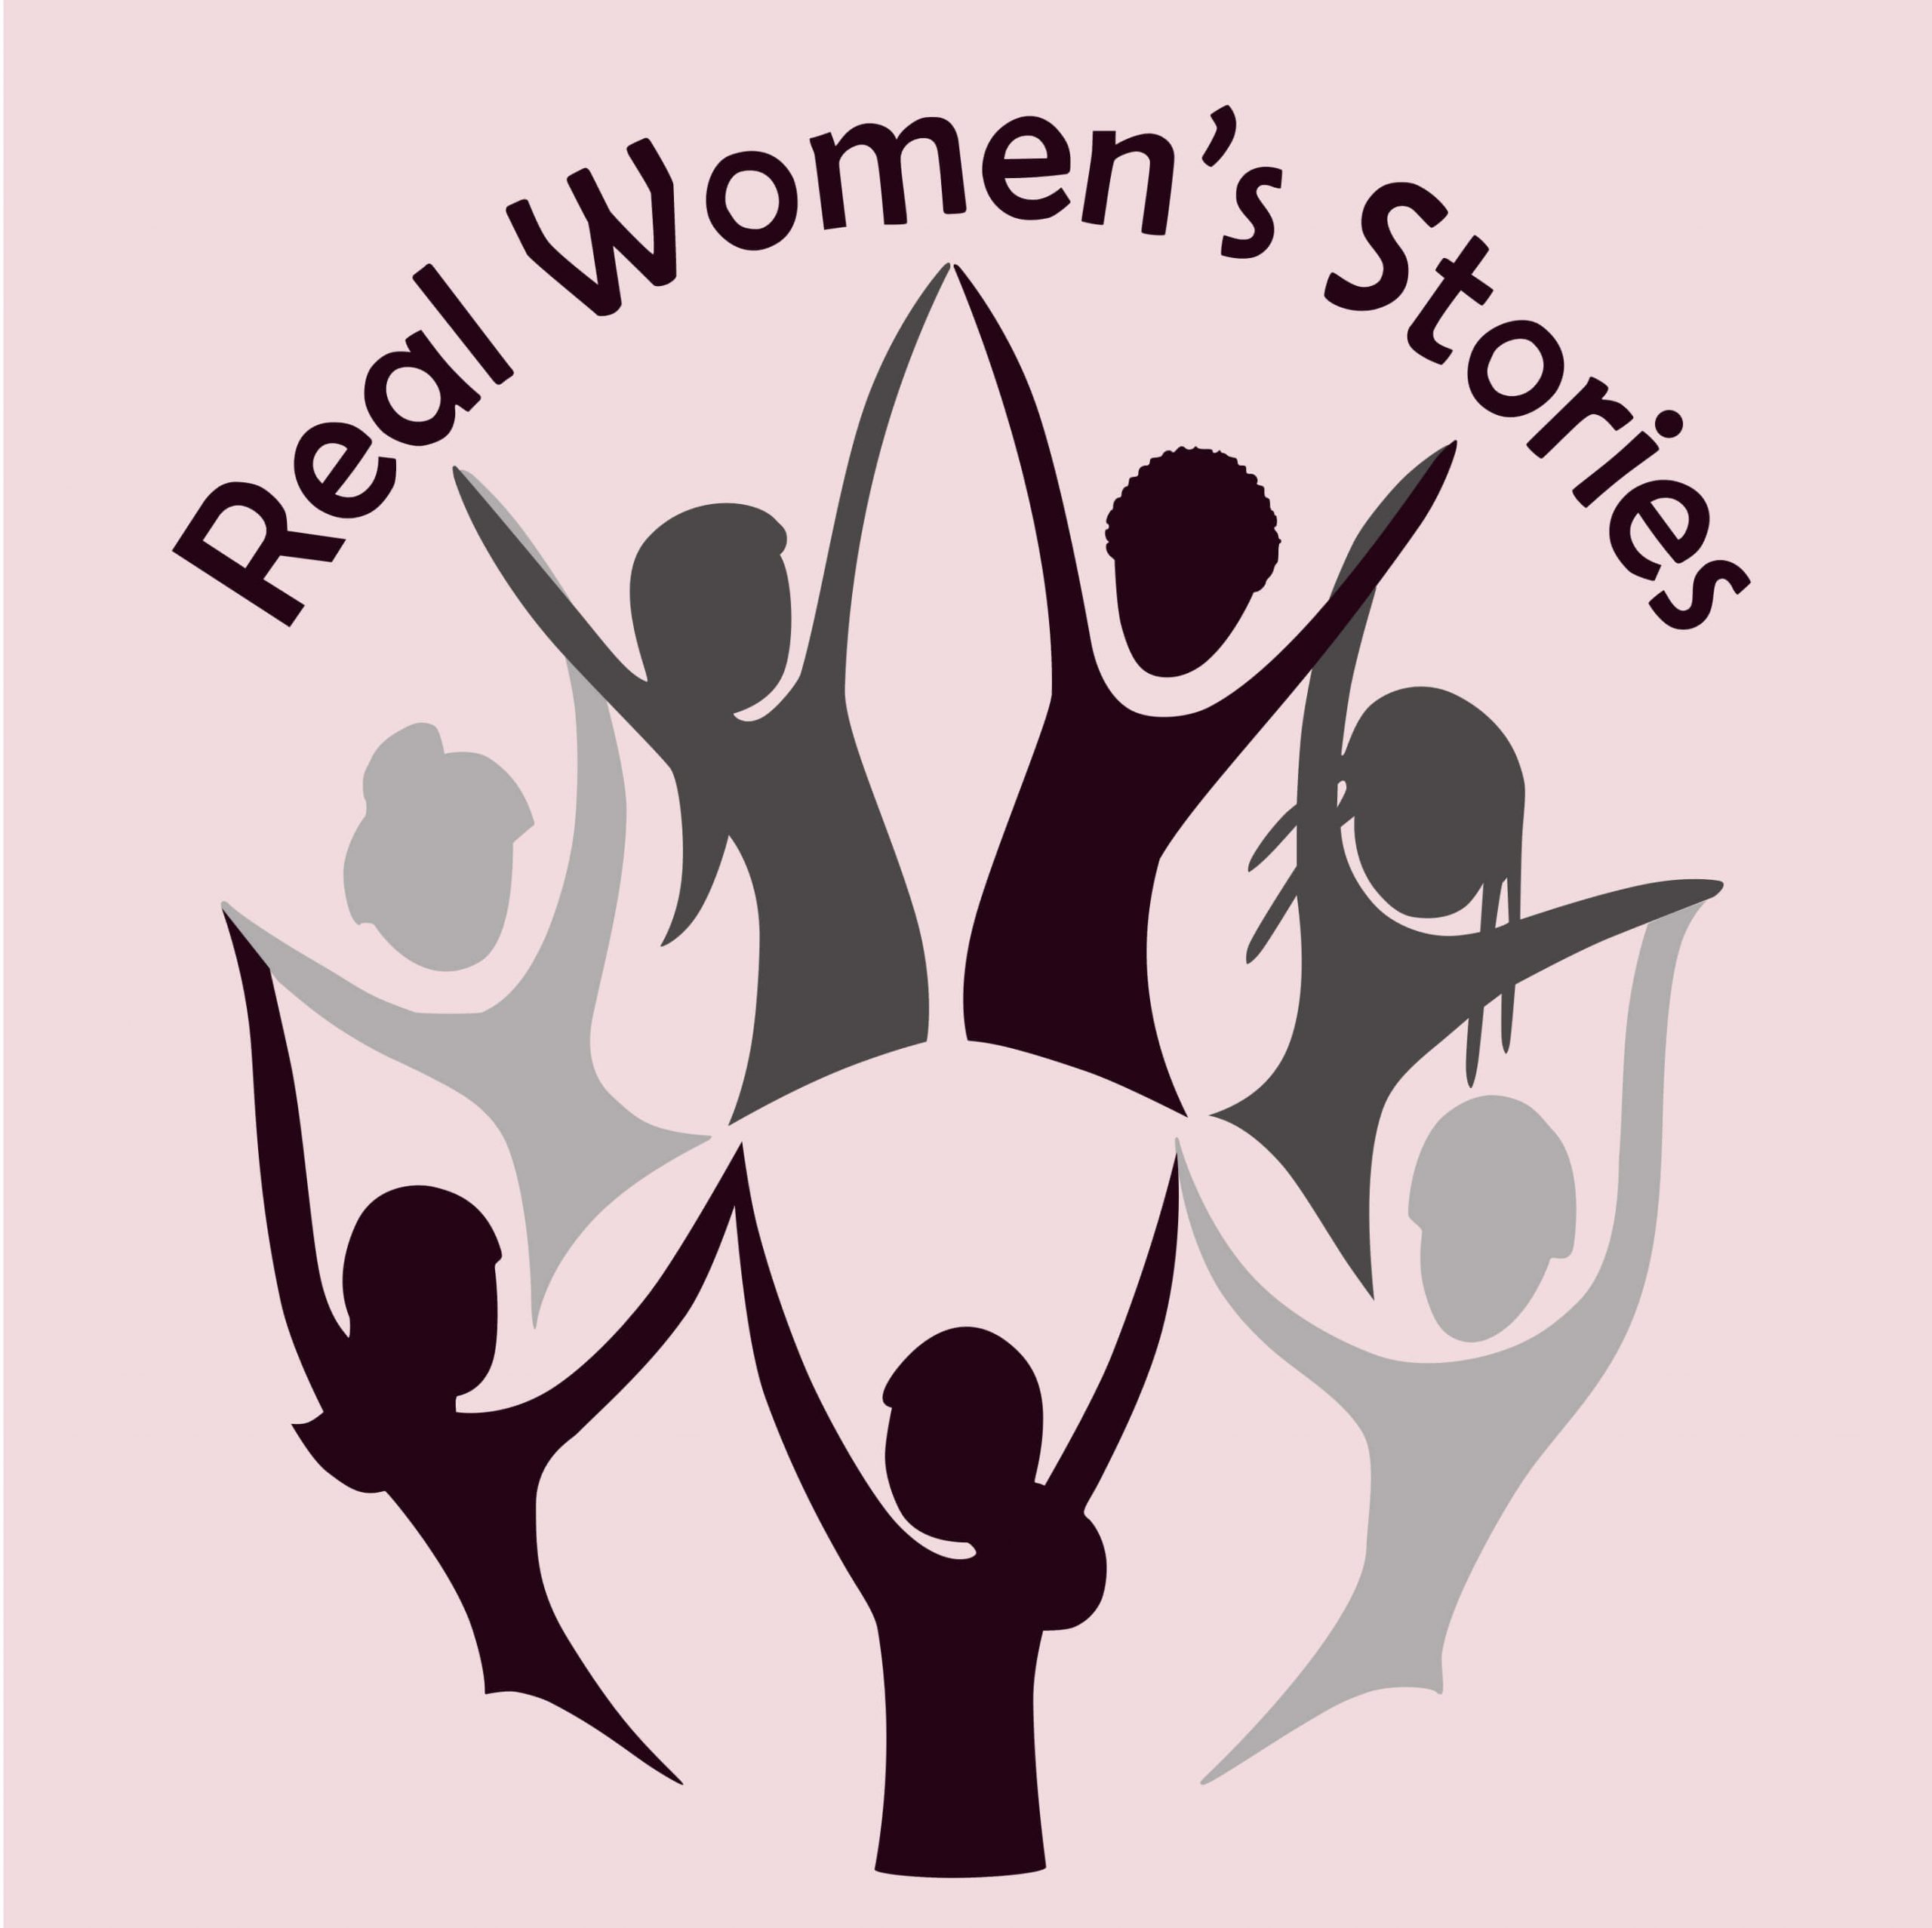 Real Women's Stories Logo. Pink oval with general shadow images of women holding hands